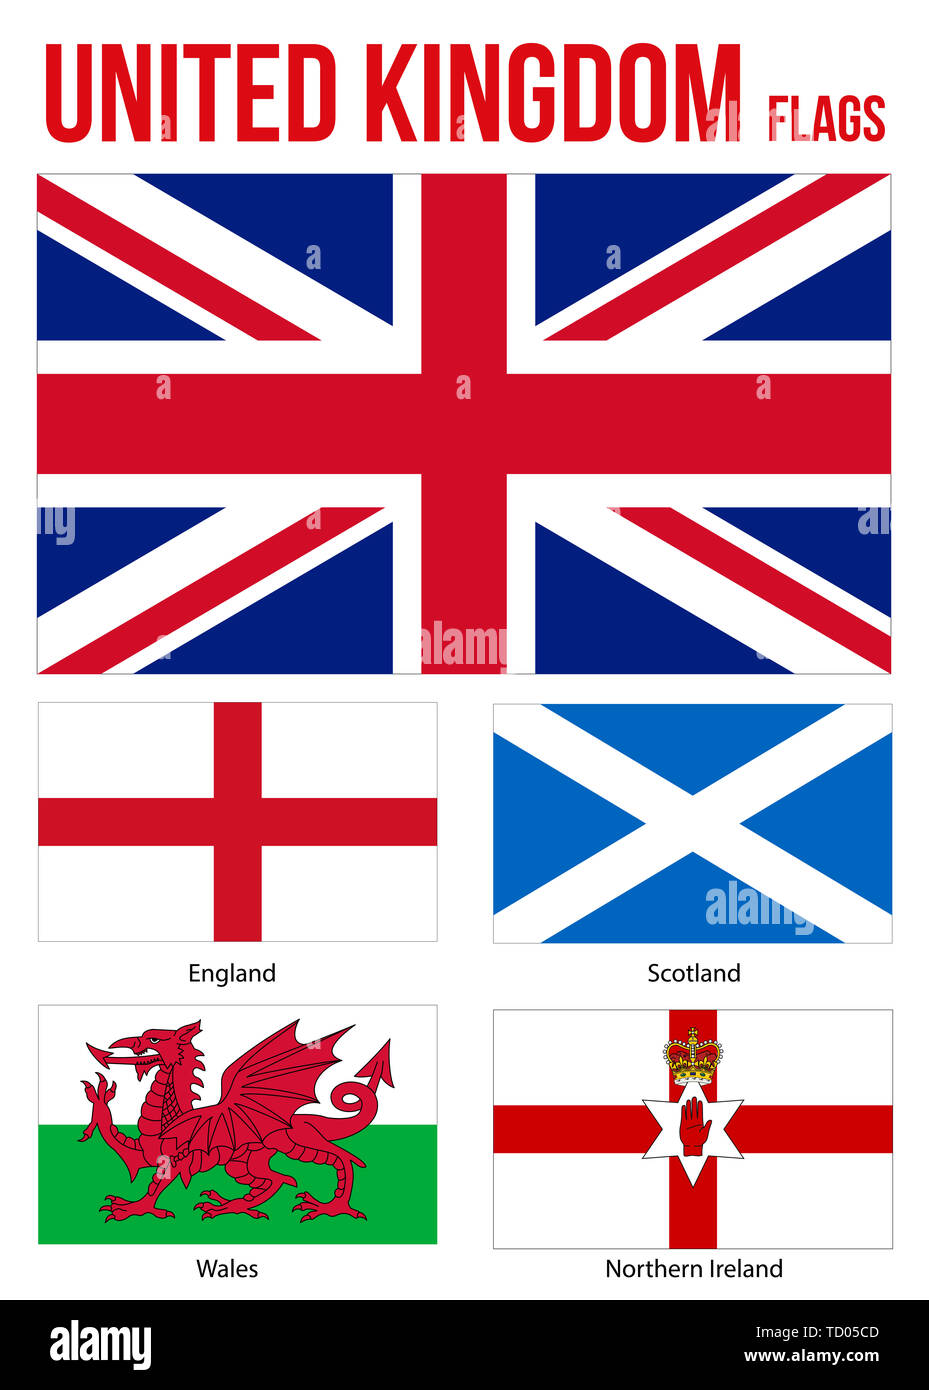 United Kingdom Flags Collection Vector Illustration on White Background. Countries of the United Kingdom. Flag of England, Northern Ireland, Wales Stock Photo